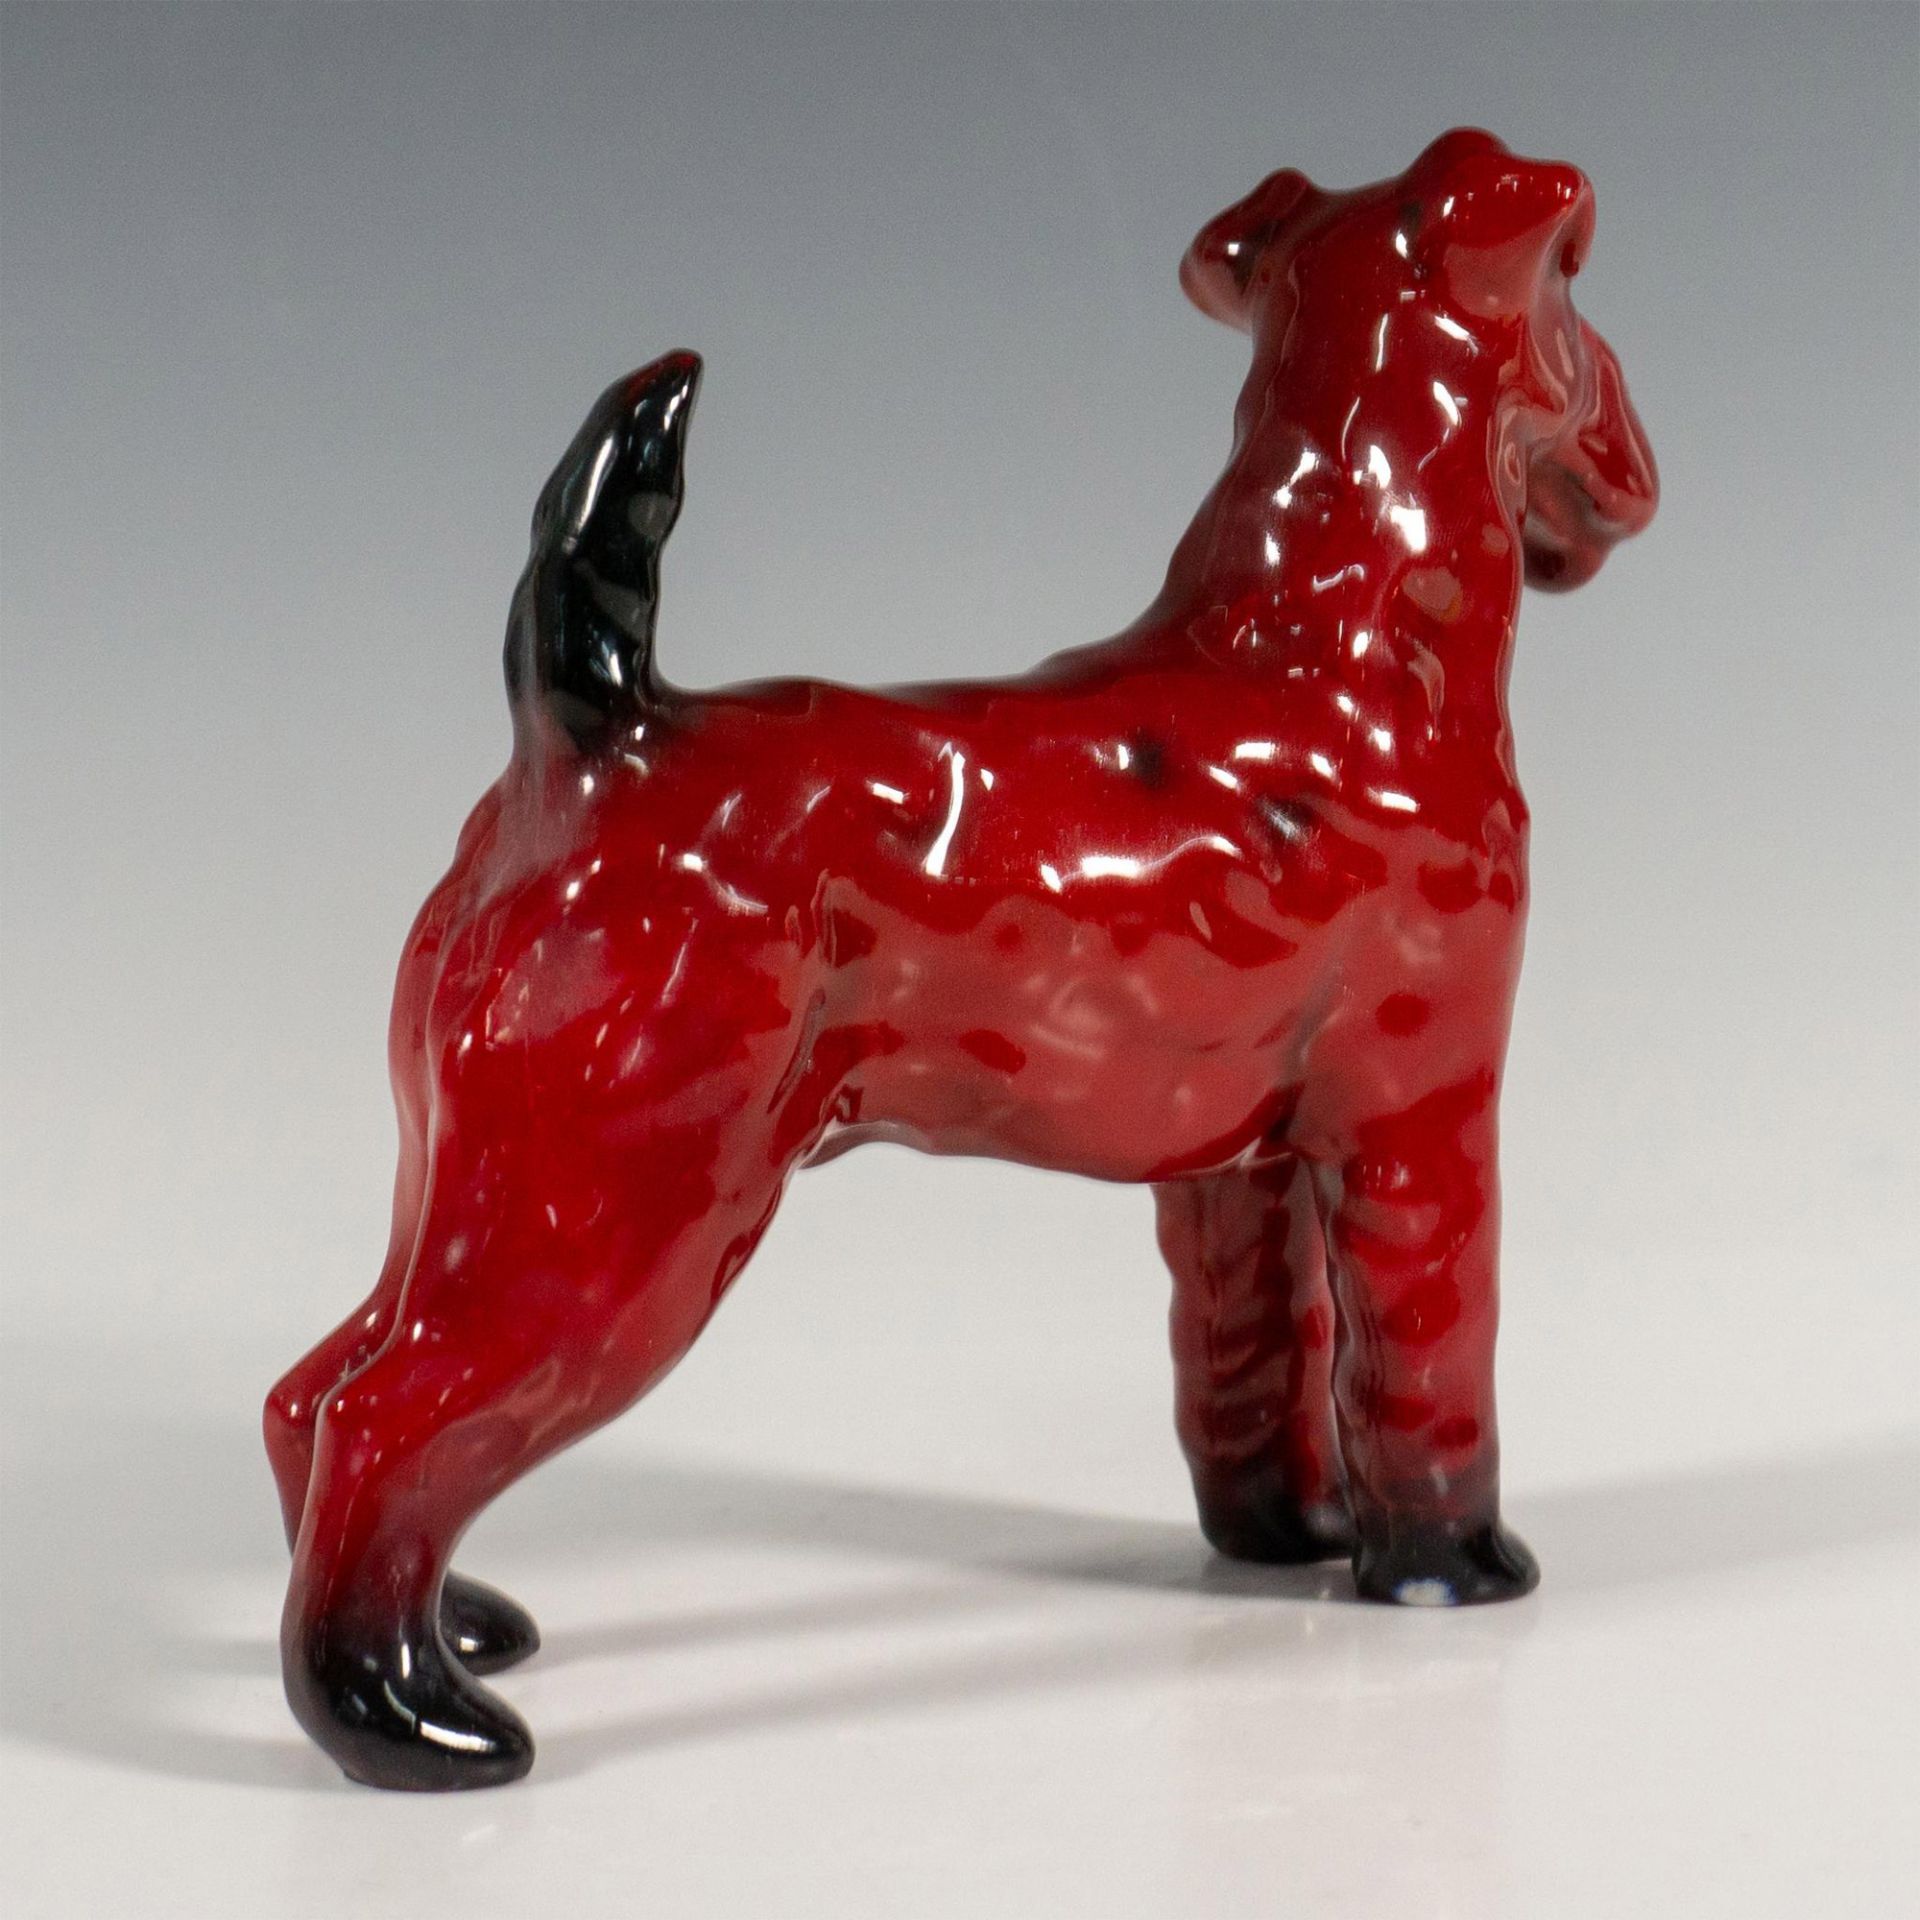 Royal Doulton Flambe Figurine, Airedale Terrier HN1023 - Image 2 of 5